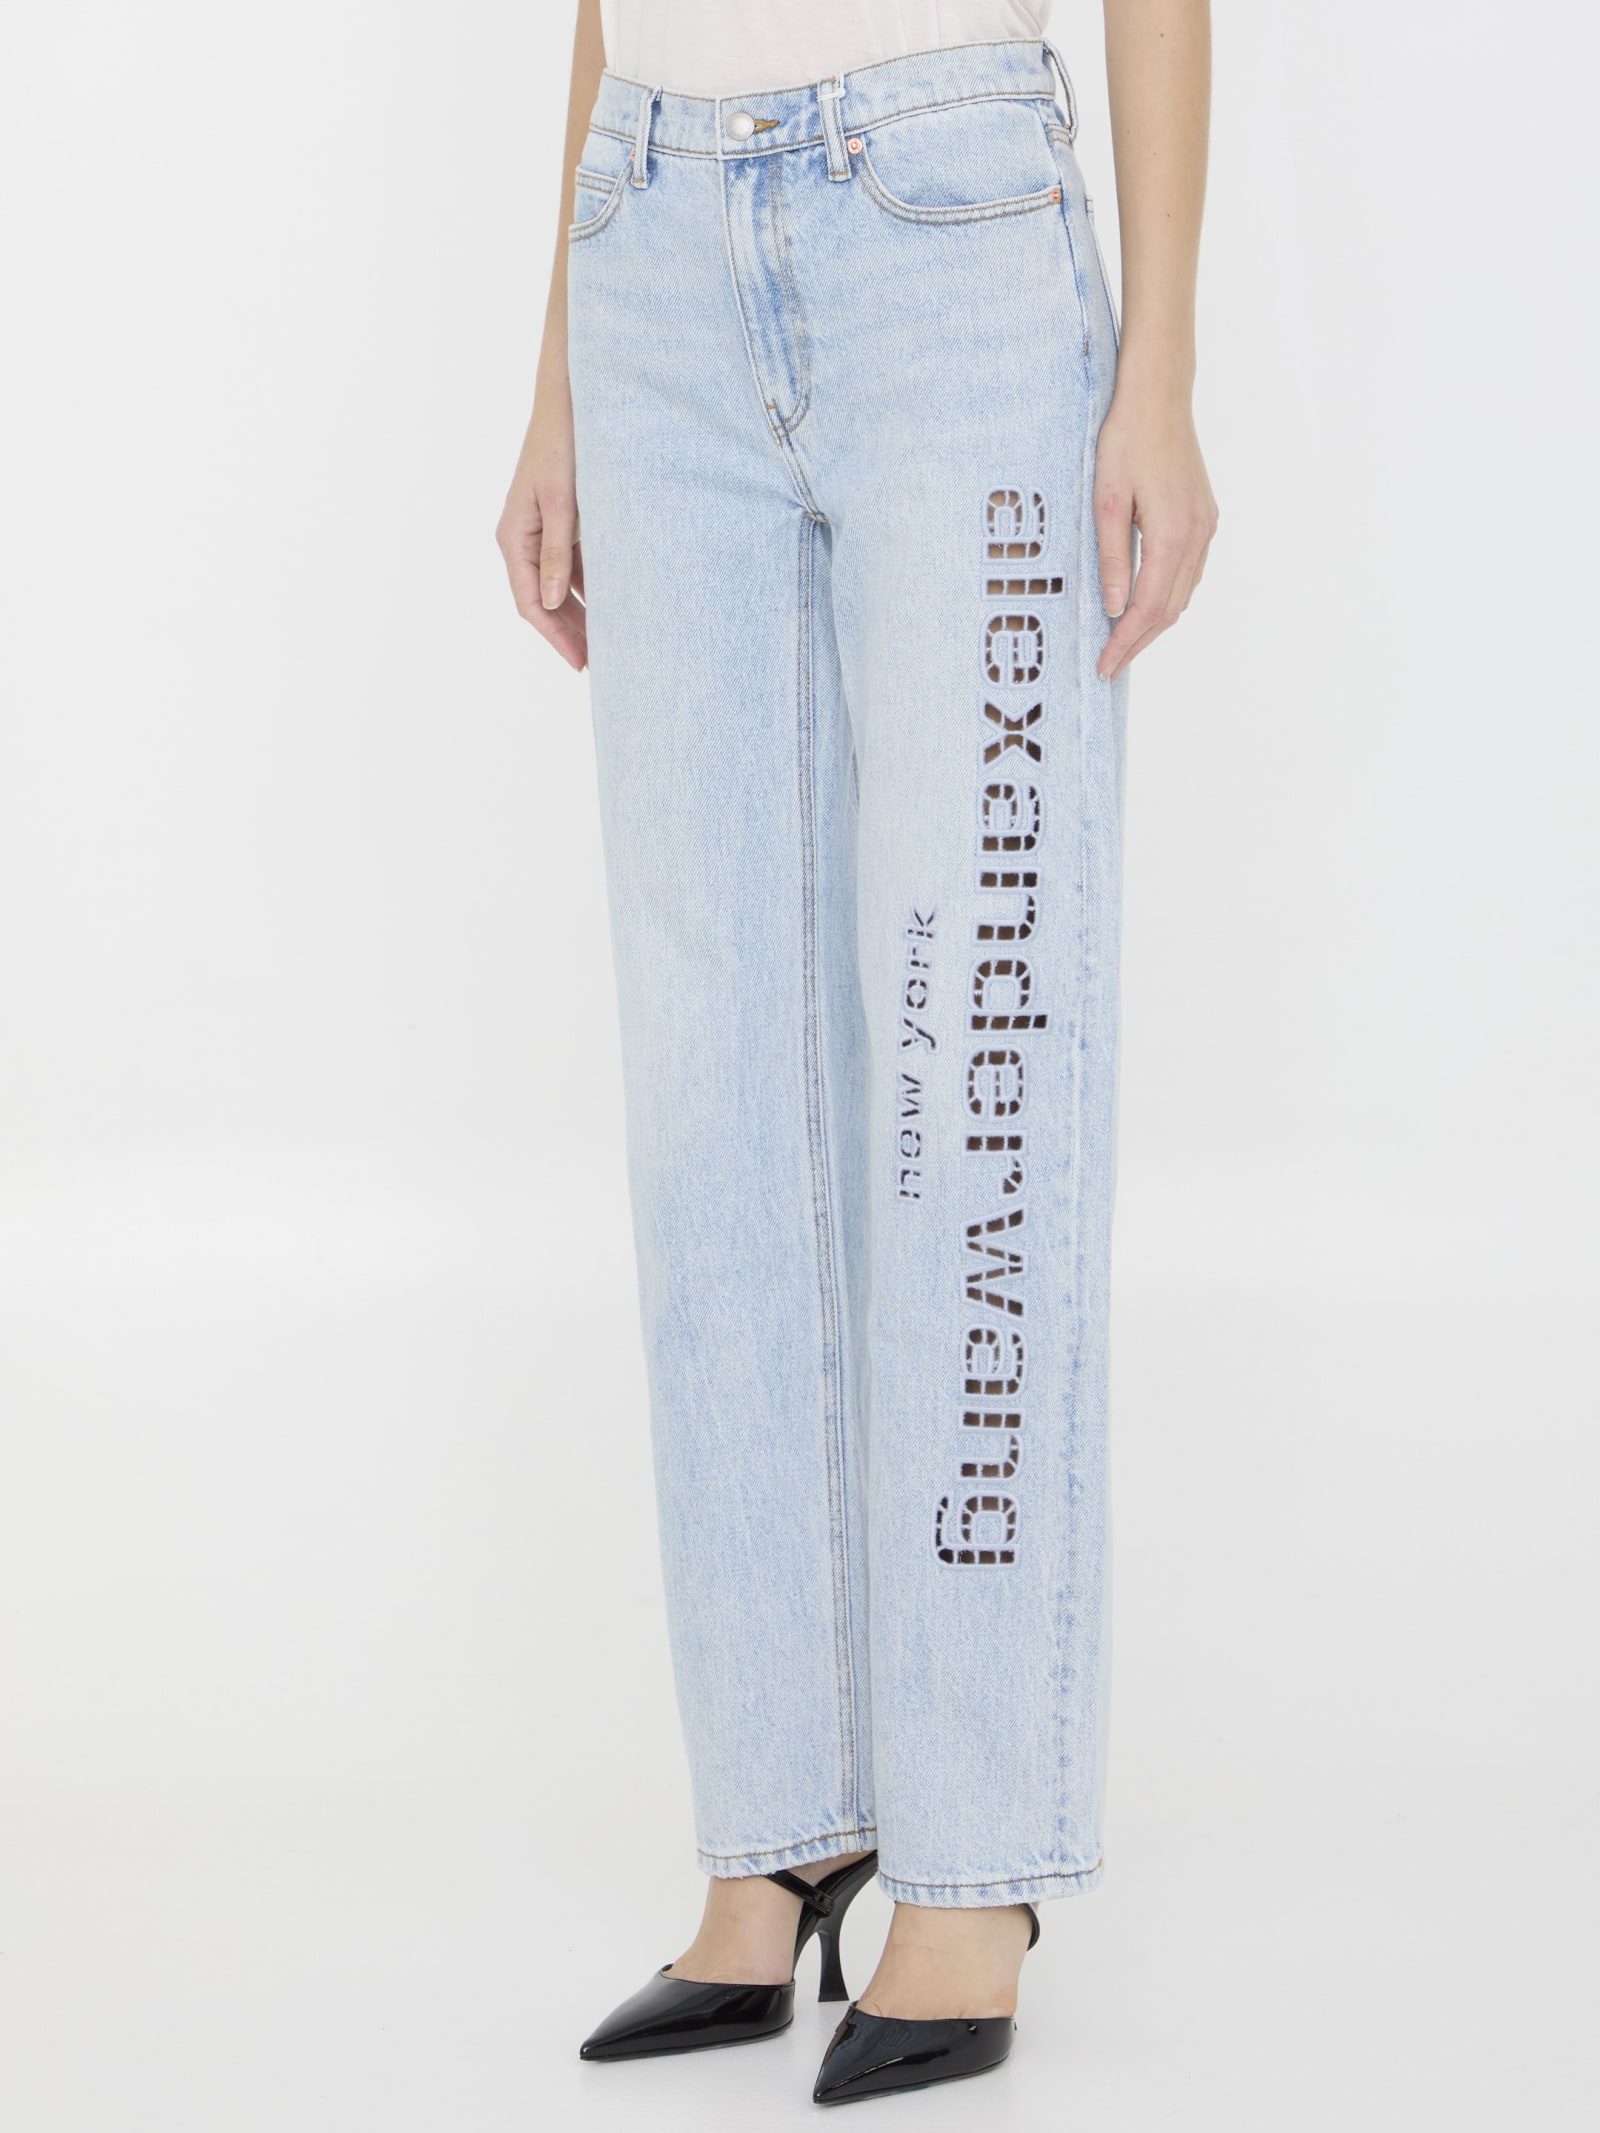 Alexander Wang Washed Rhinestone Jeans - Woman Jeans Blue 26